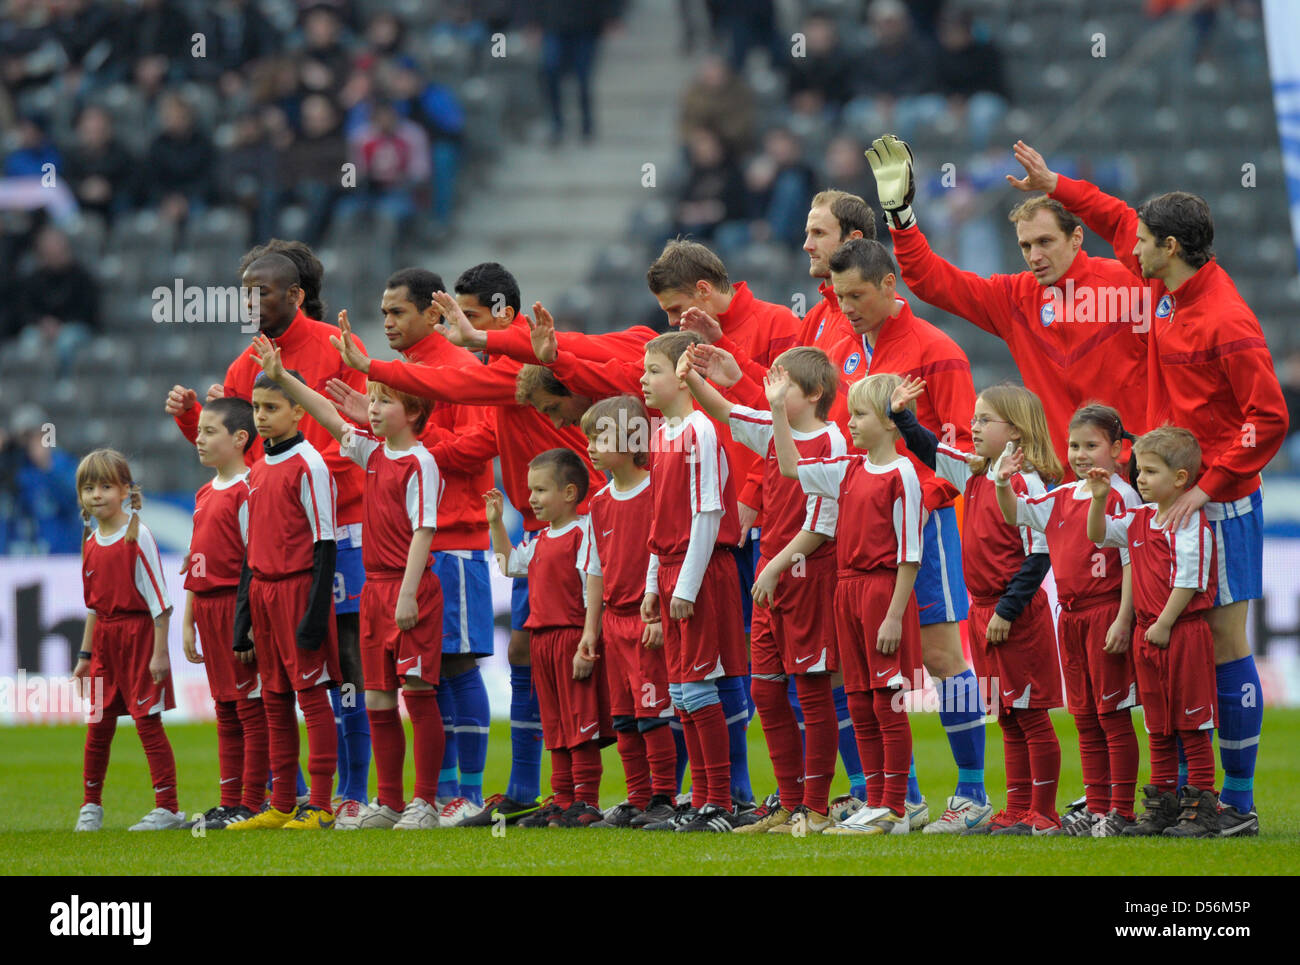 Berlin's players wear red Nike jackets prior to the German Bundesliga match  Hertha Berlin vs Nuremberg at the Olympic stadium in Berlin, Germany, 13  March 2010. Sportswear supplier Nike wants to support